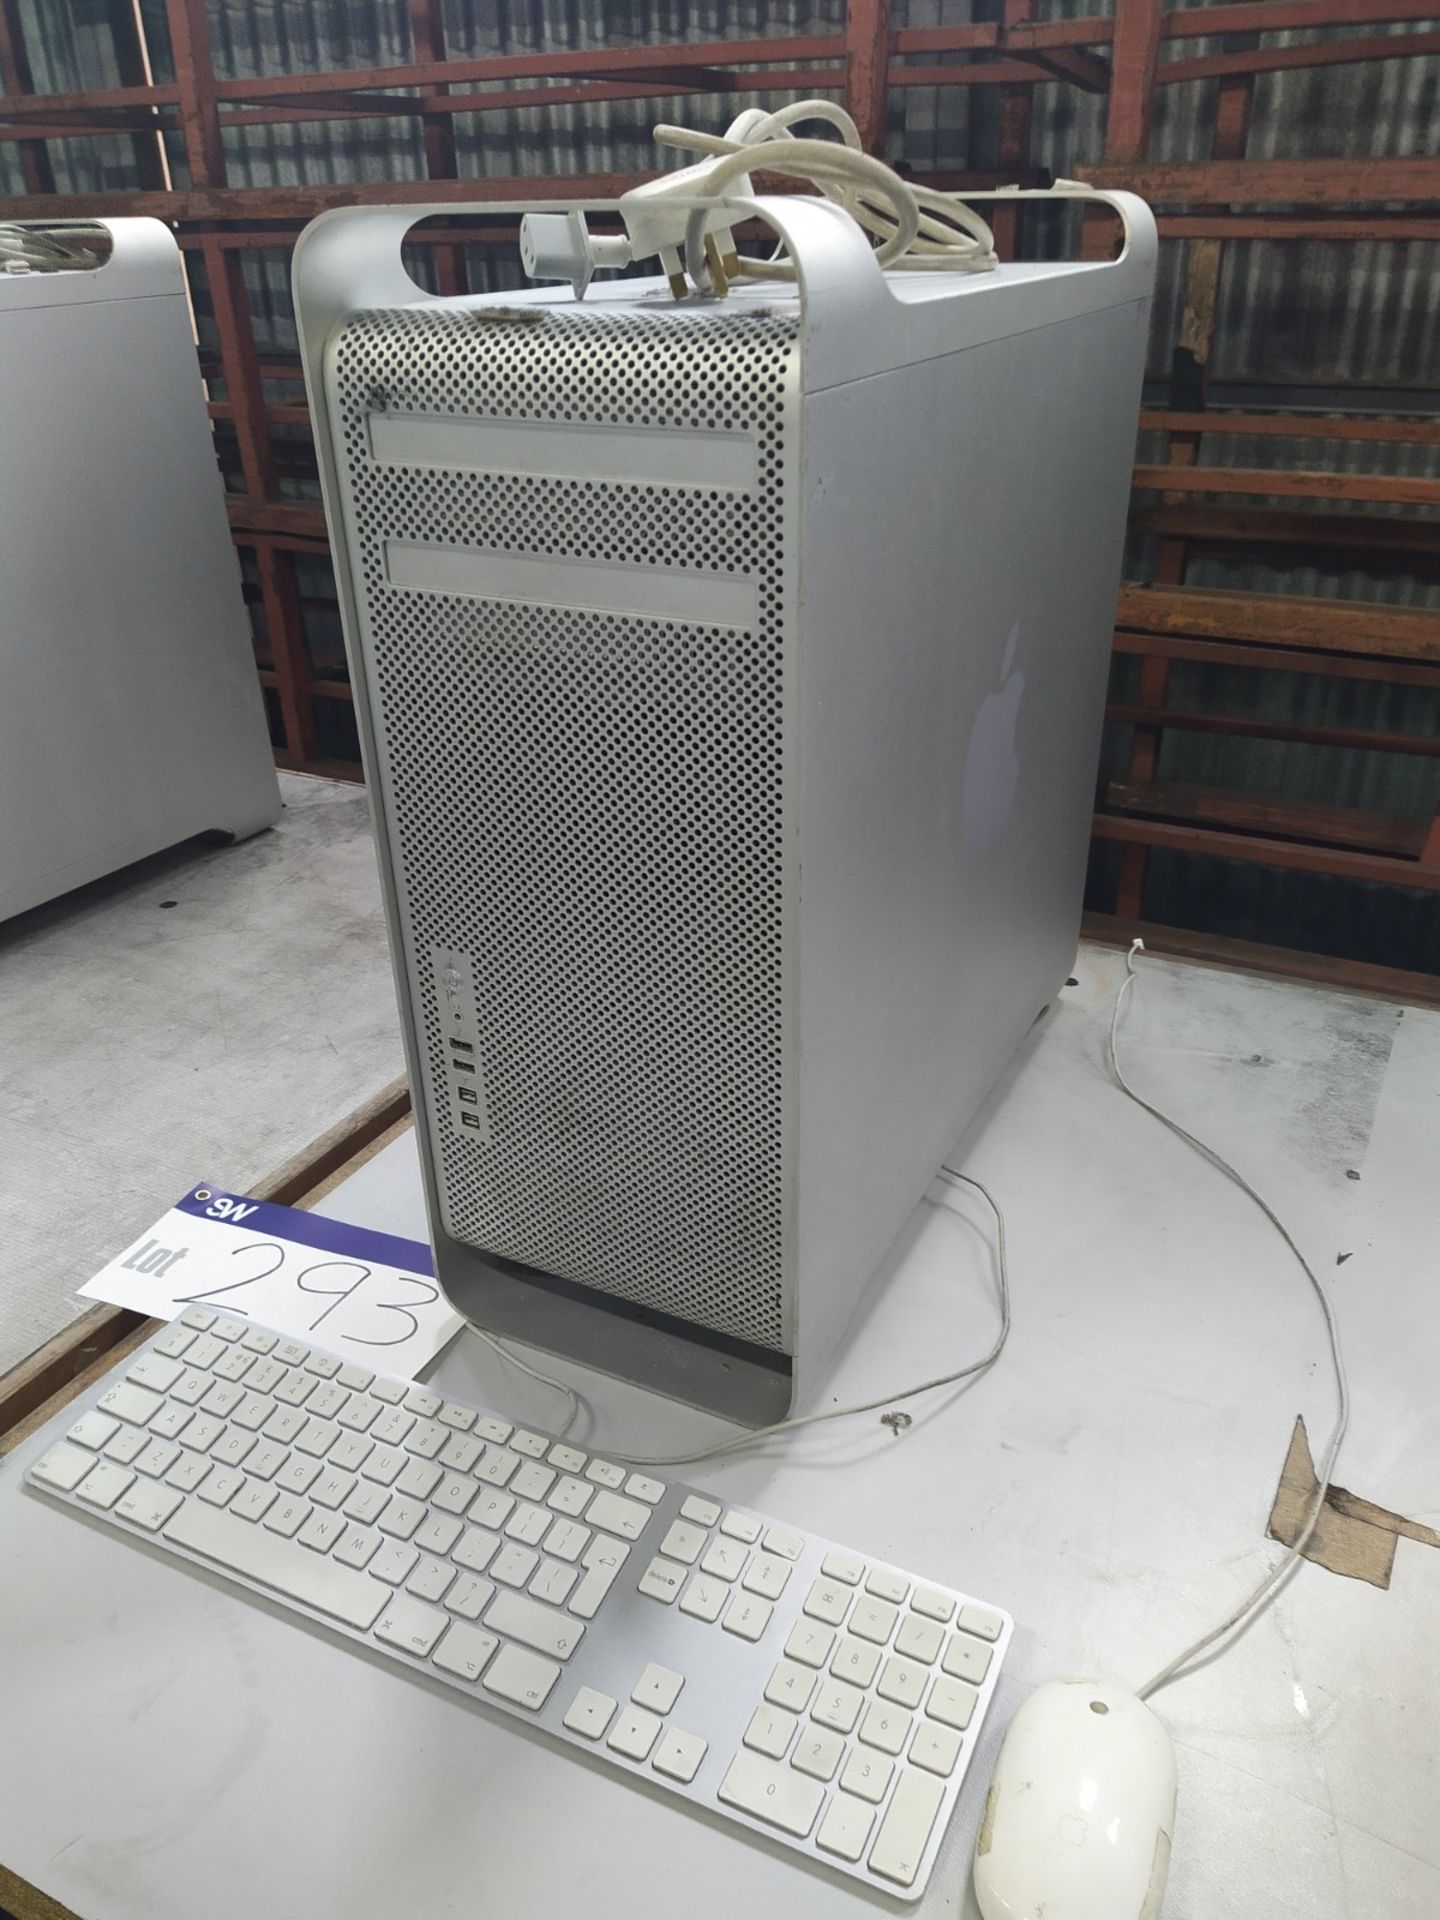 Apple Mac Pro computer, keyboard and mouse, free loading onto purchasers transport - yes, item - Image 3 of 5